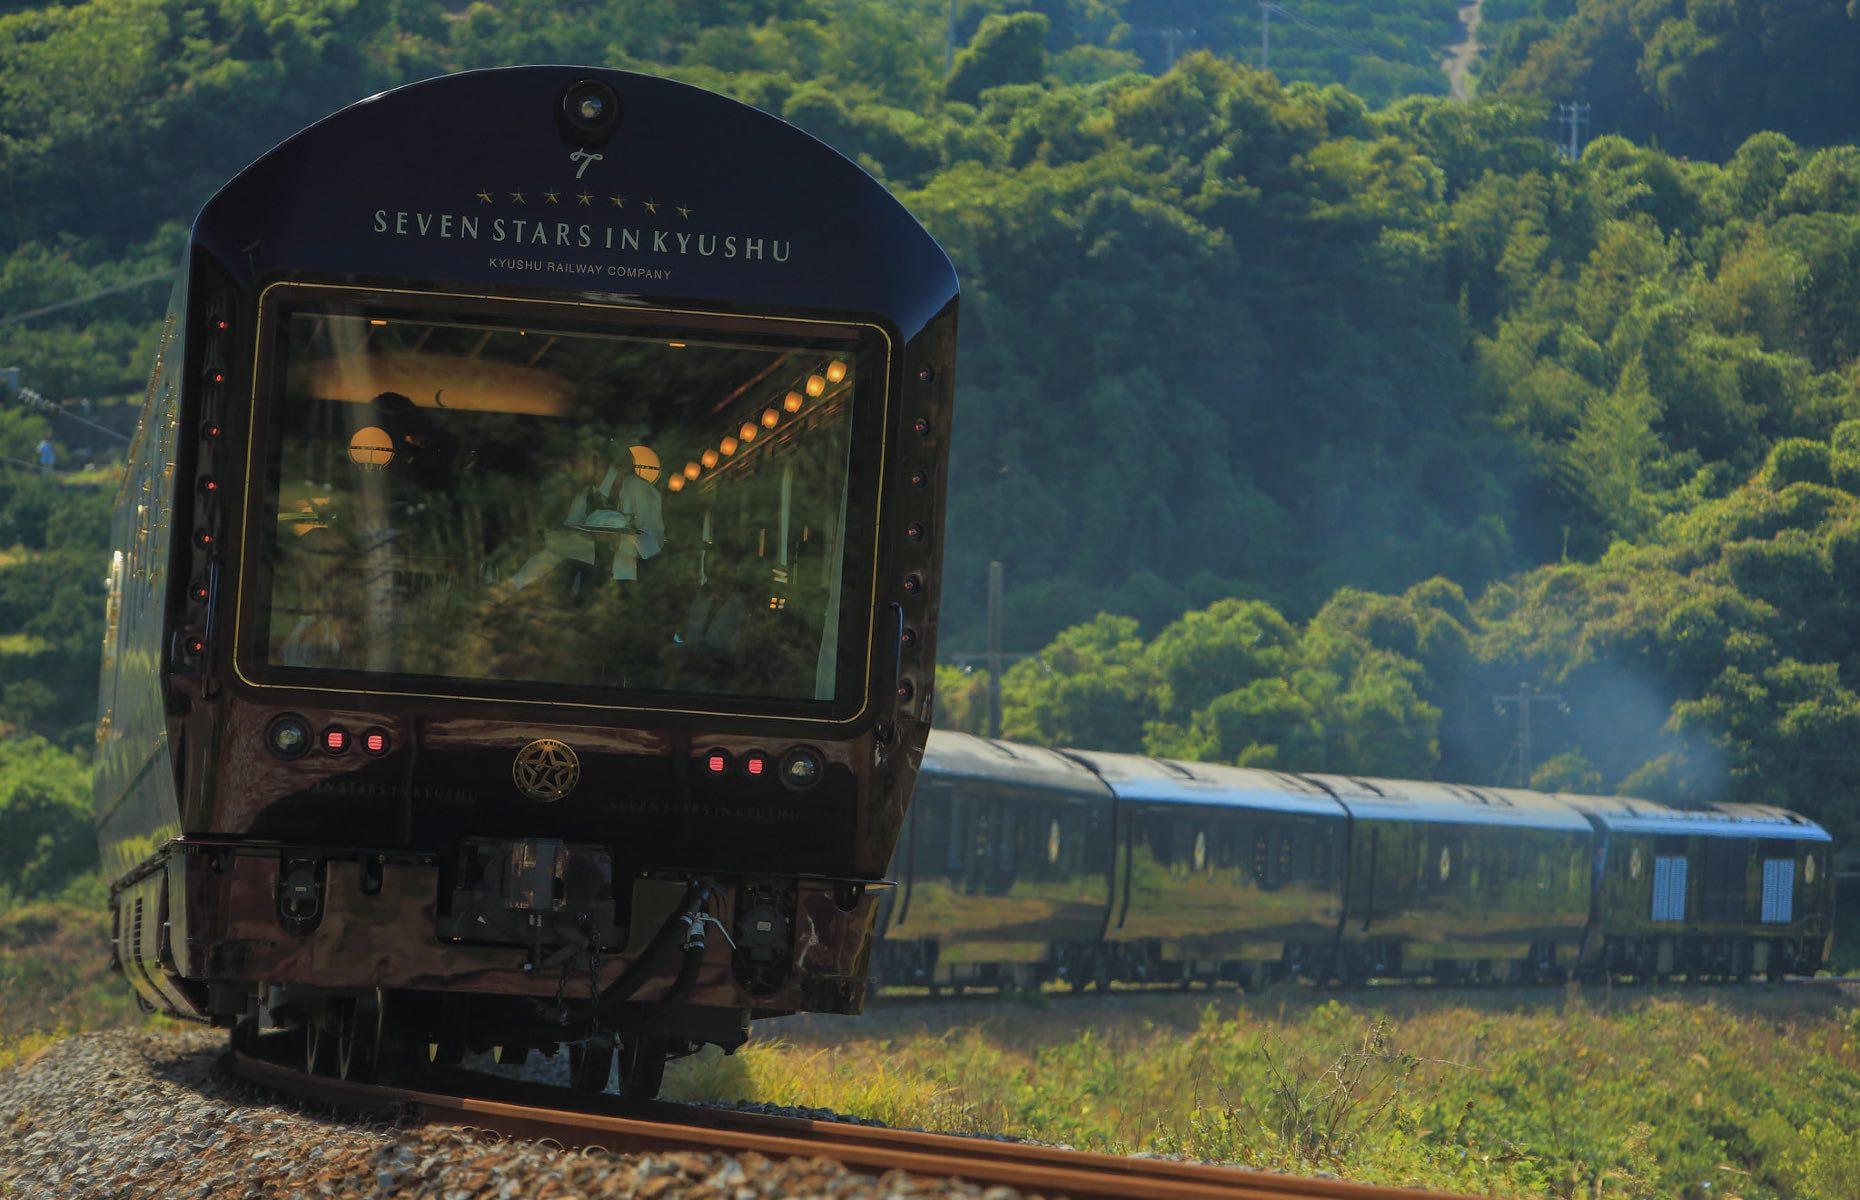 <p>Operated by the Kyushu Railway Company, the <a href="https://www.cruisetrain-sevenstars.jp/english/">Seven Stars train</a> covers the Kyushu region – Japan’s southernmost island – and its popular three-night package takes in five of its seven prefectures, with highlights including traditional onsens (hot springs), the scenic Ushinohama coast and Mount Aso, one of the world’s largest calderas. And there’s no excuse for missing out on the scenery with extra large panoramic windows in the first and seventh cars.</p>